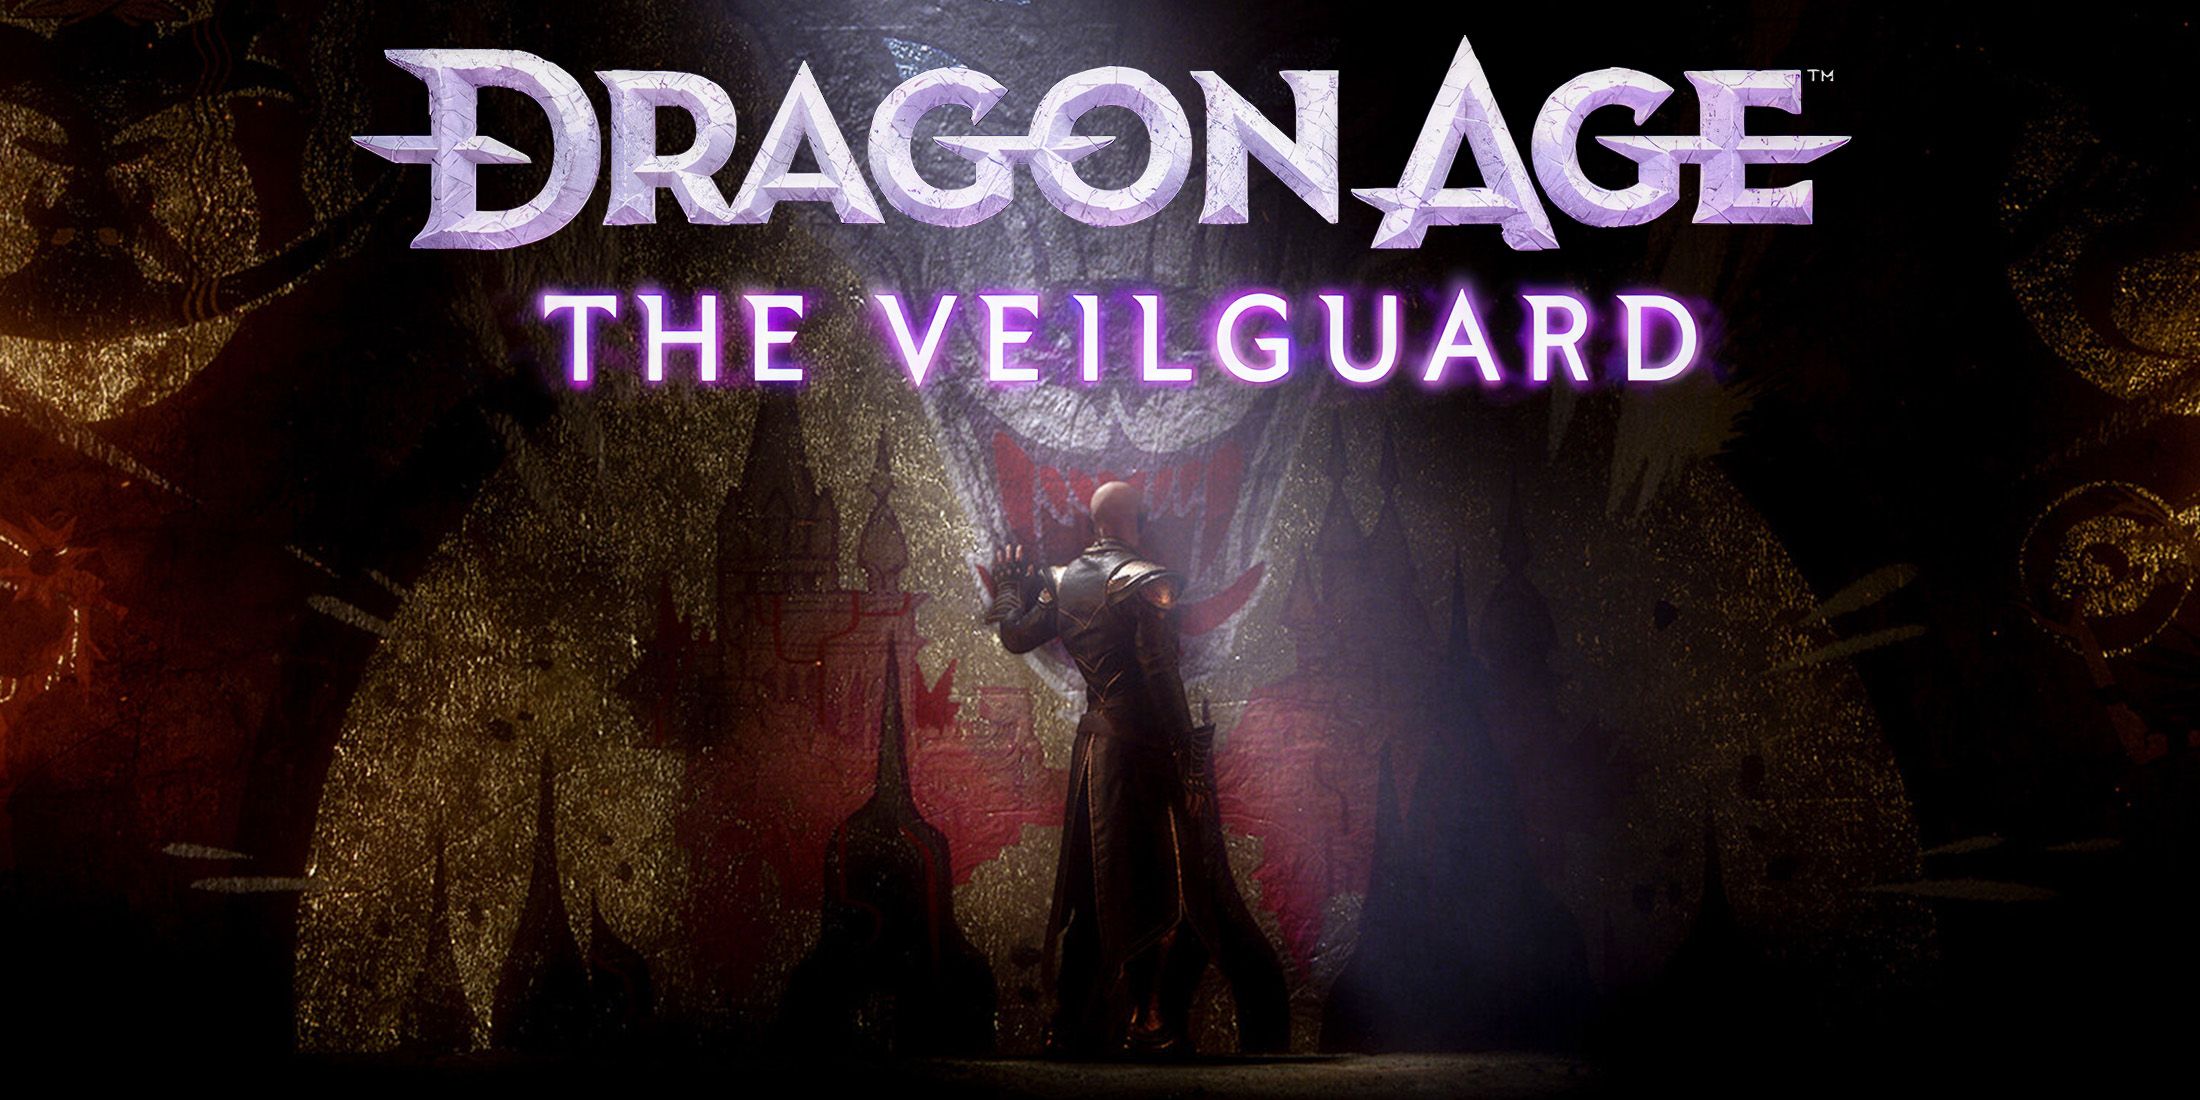 Dragon Age The Veilguard bald character in light below game logo